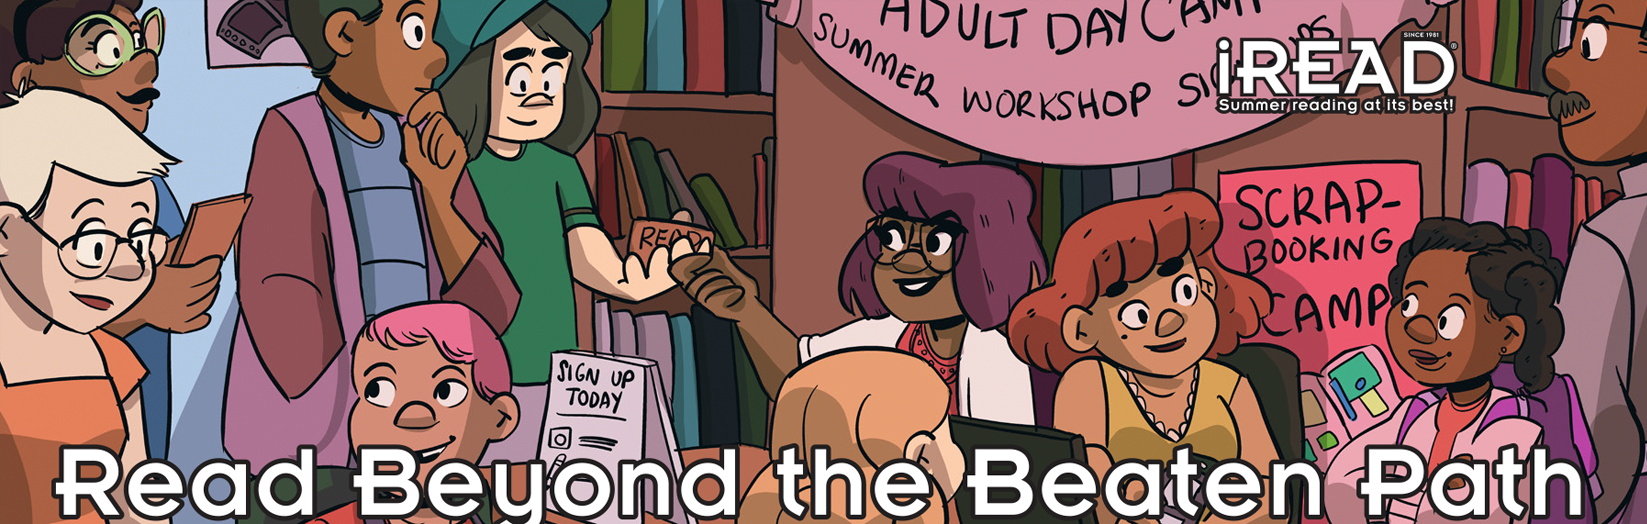 A diverse group of people in a library, behind the text "Read Beyond the Beaten Path", 